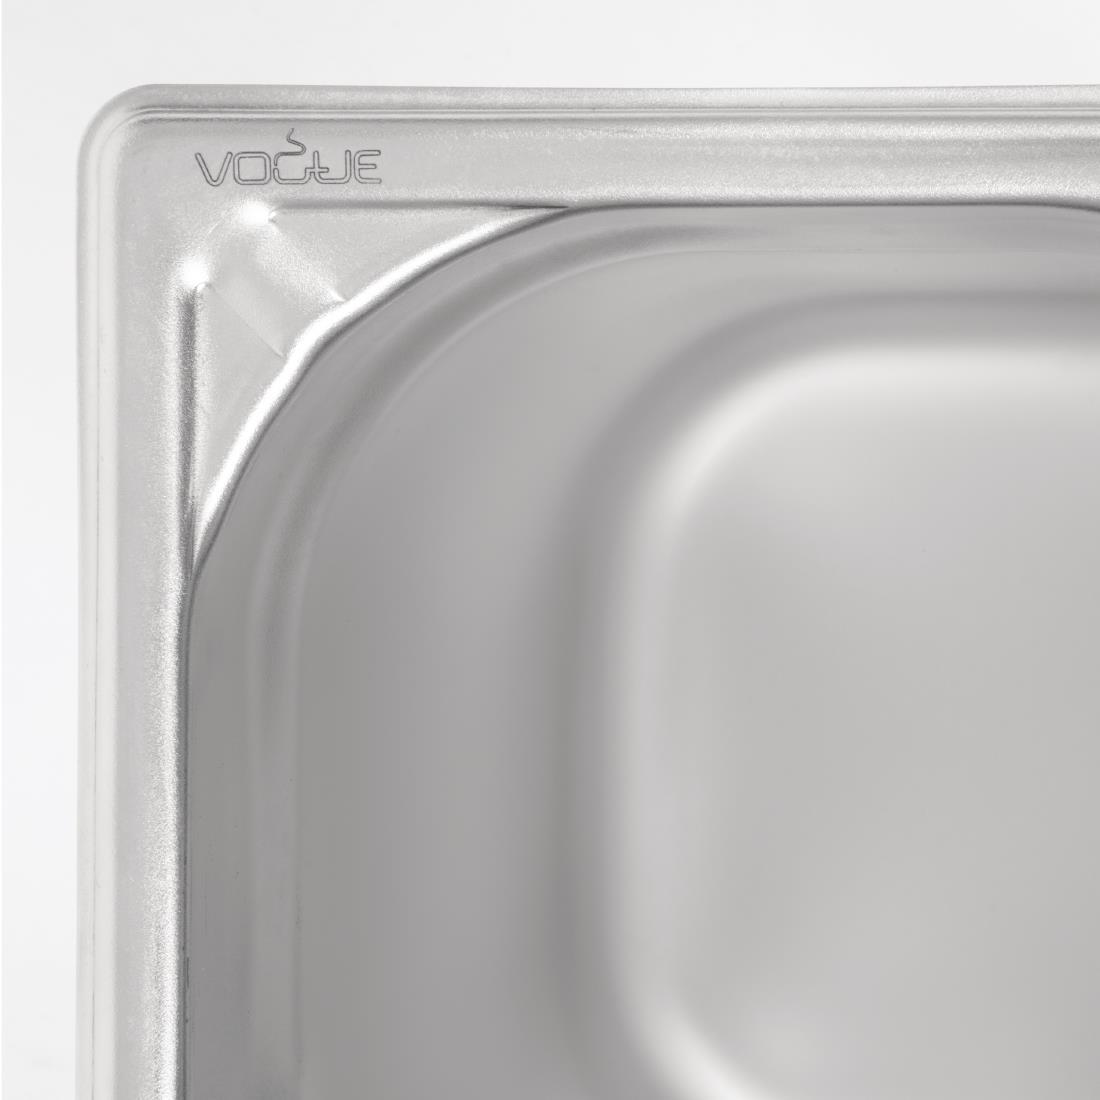 Vogue Heavy Duty Stainless Steel 1/6 Gastronorm Pan 200mm - DW452  - 5